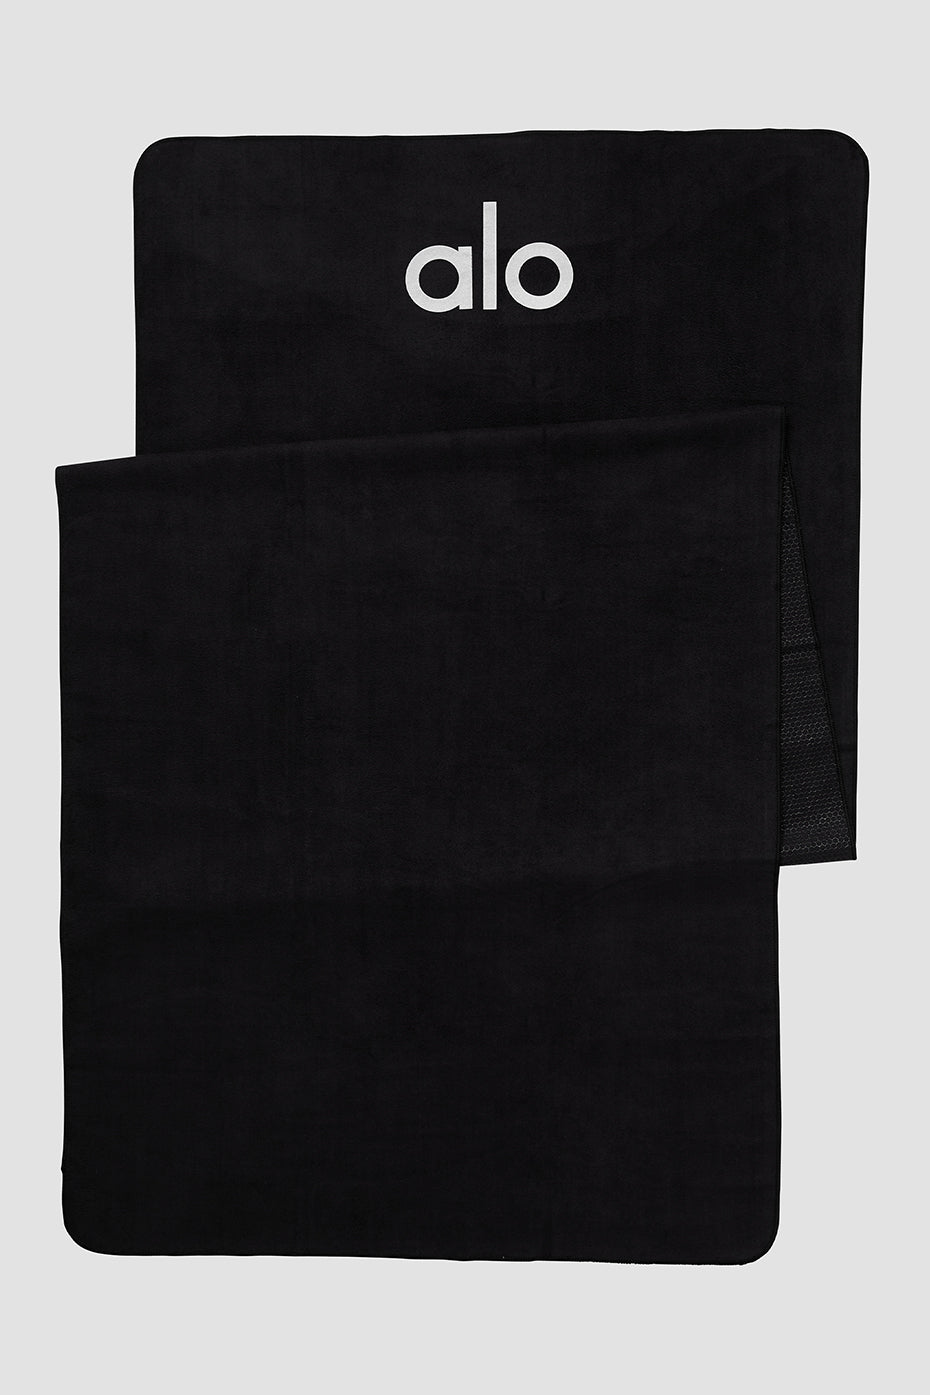 Alo Yoga Uplifting Block Eclipse /Silver One Size | Brand New In Packaging